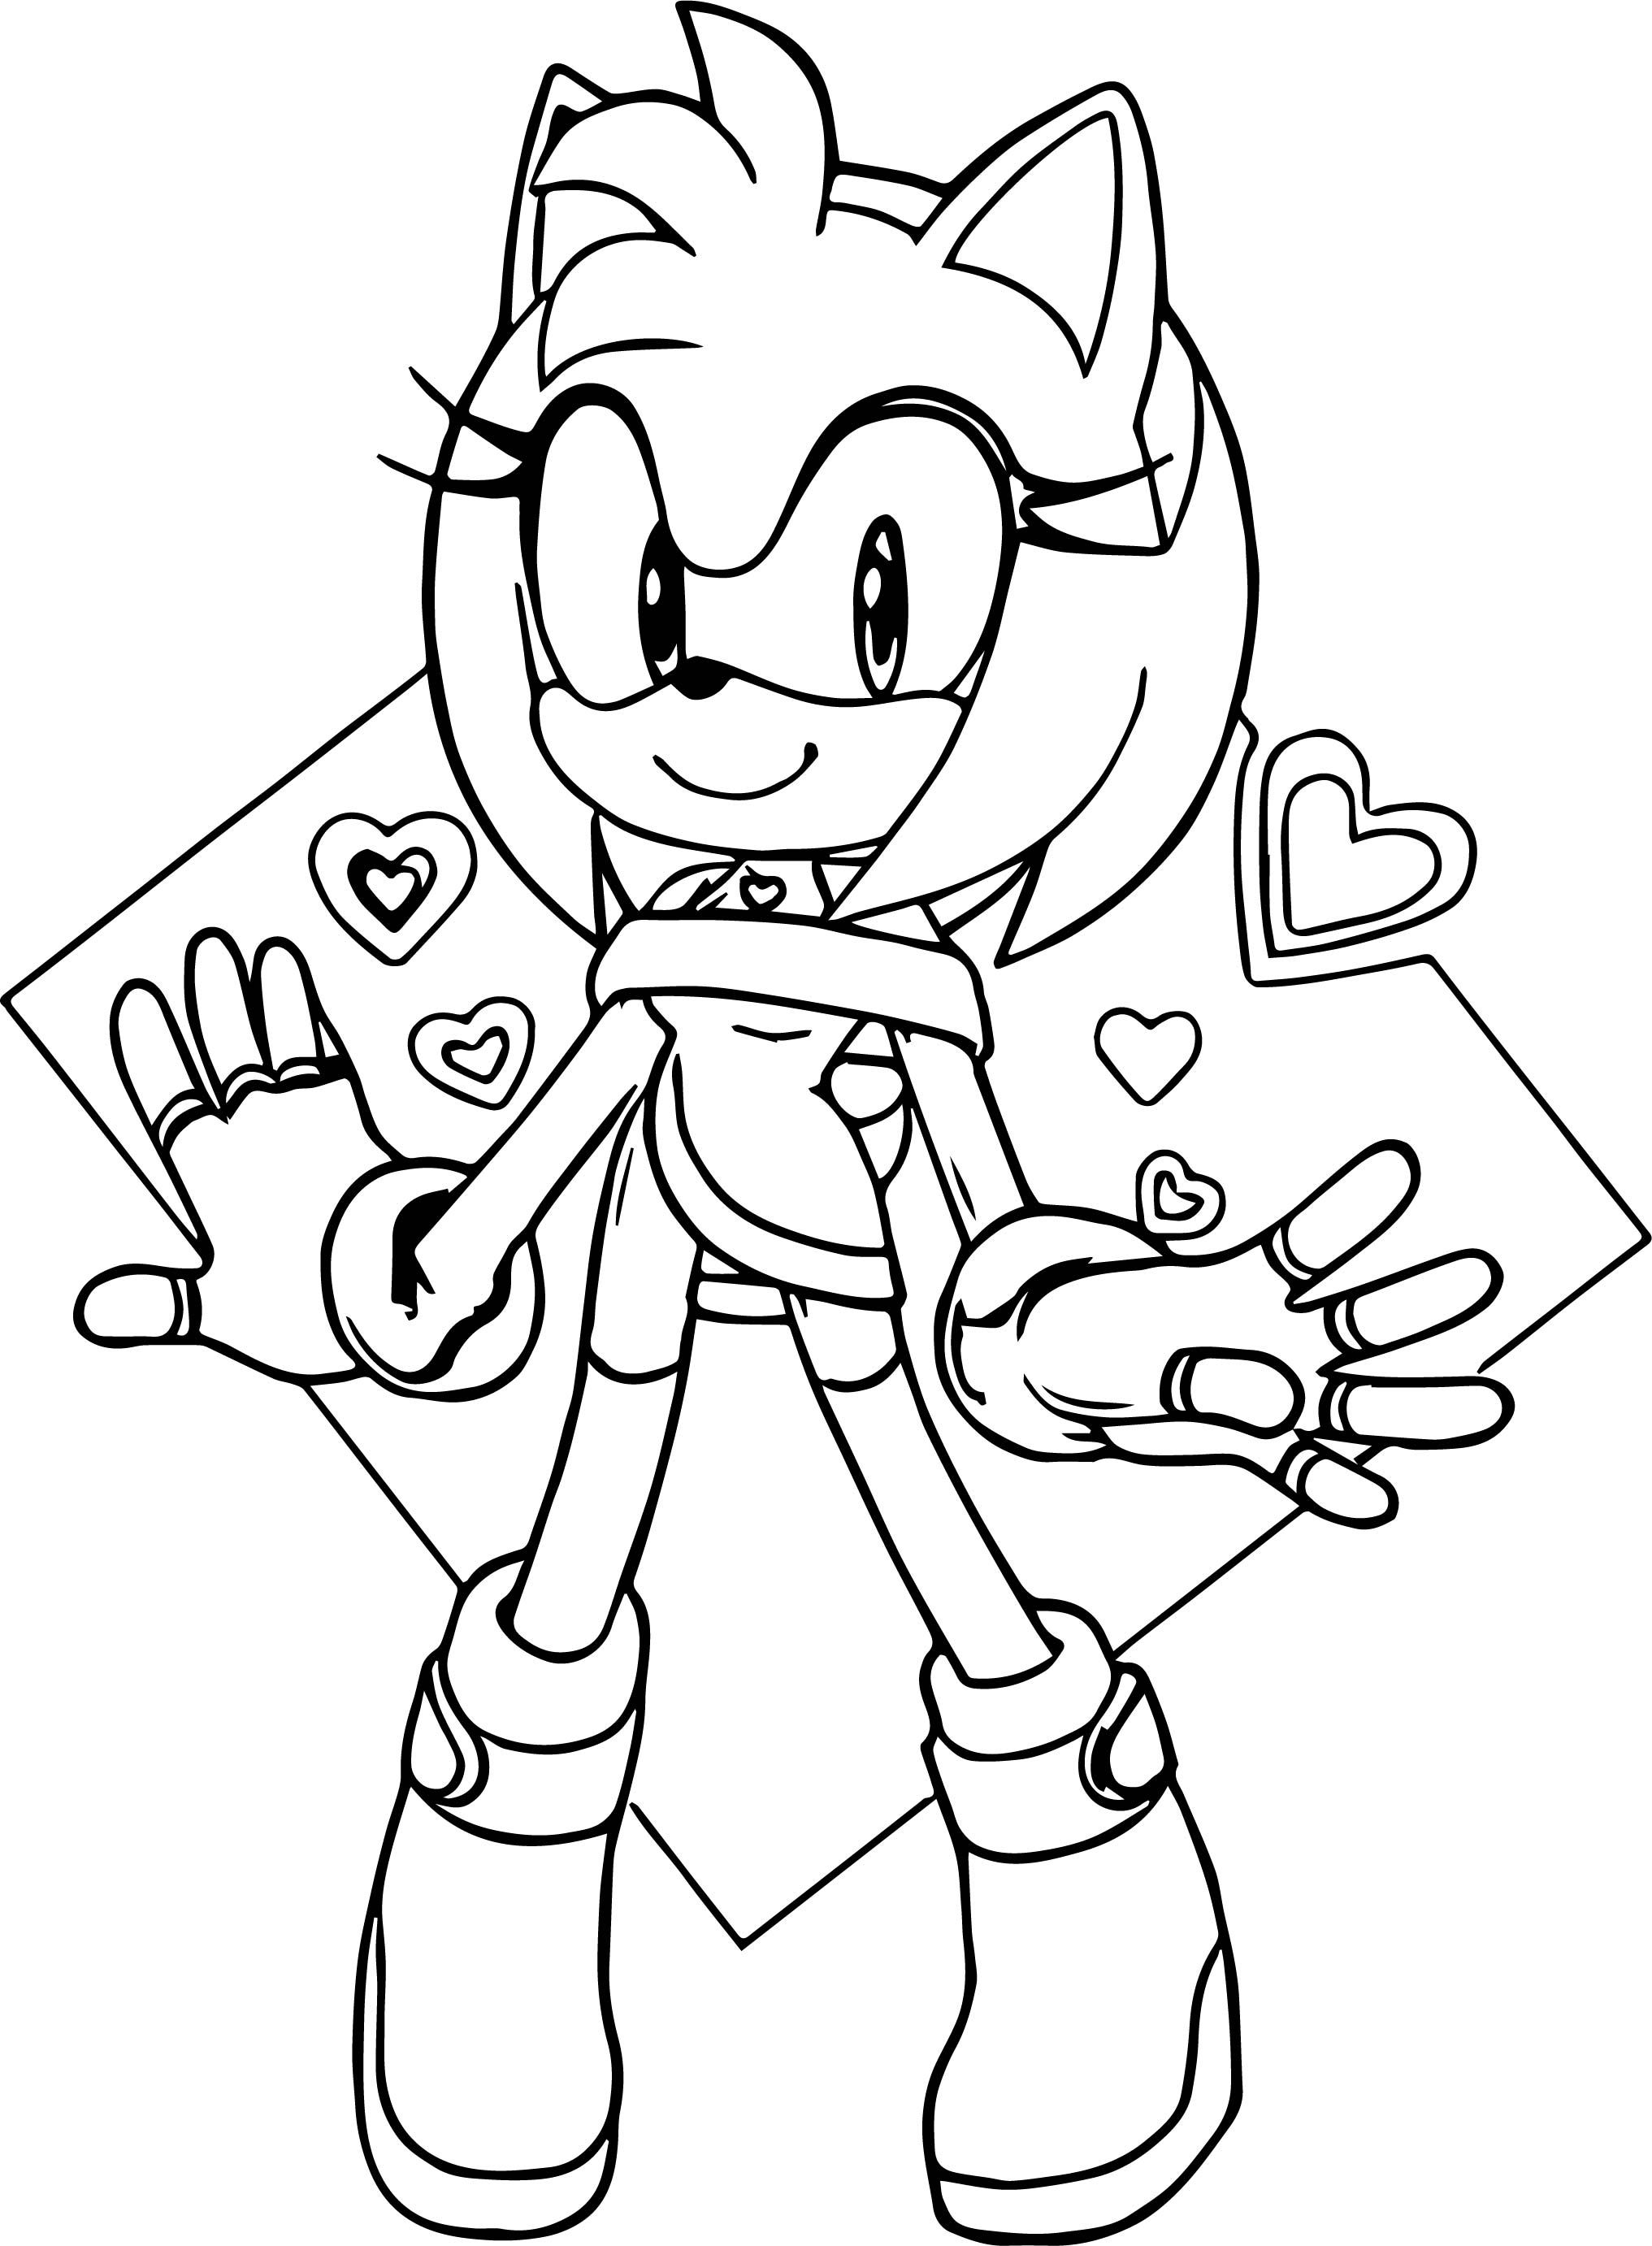 Amy Sonic Coloring Pages.